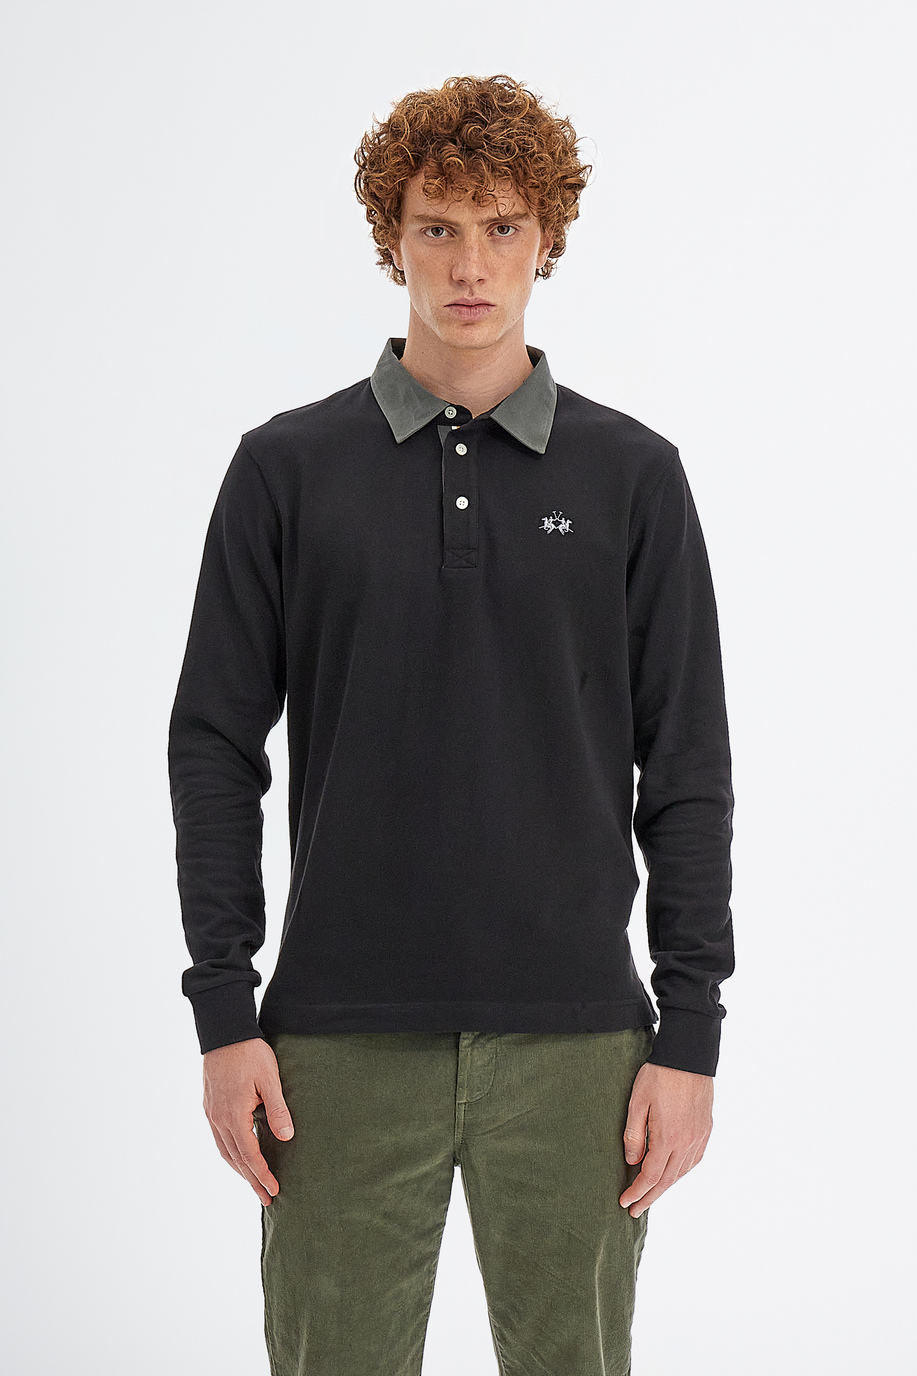 Men’s polo shirt with long sleeves in regular fit jersey cotton - -30% | step 3 | US | La Martina - Official Online Shop